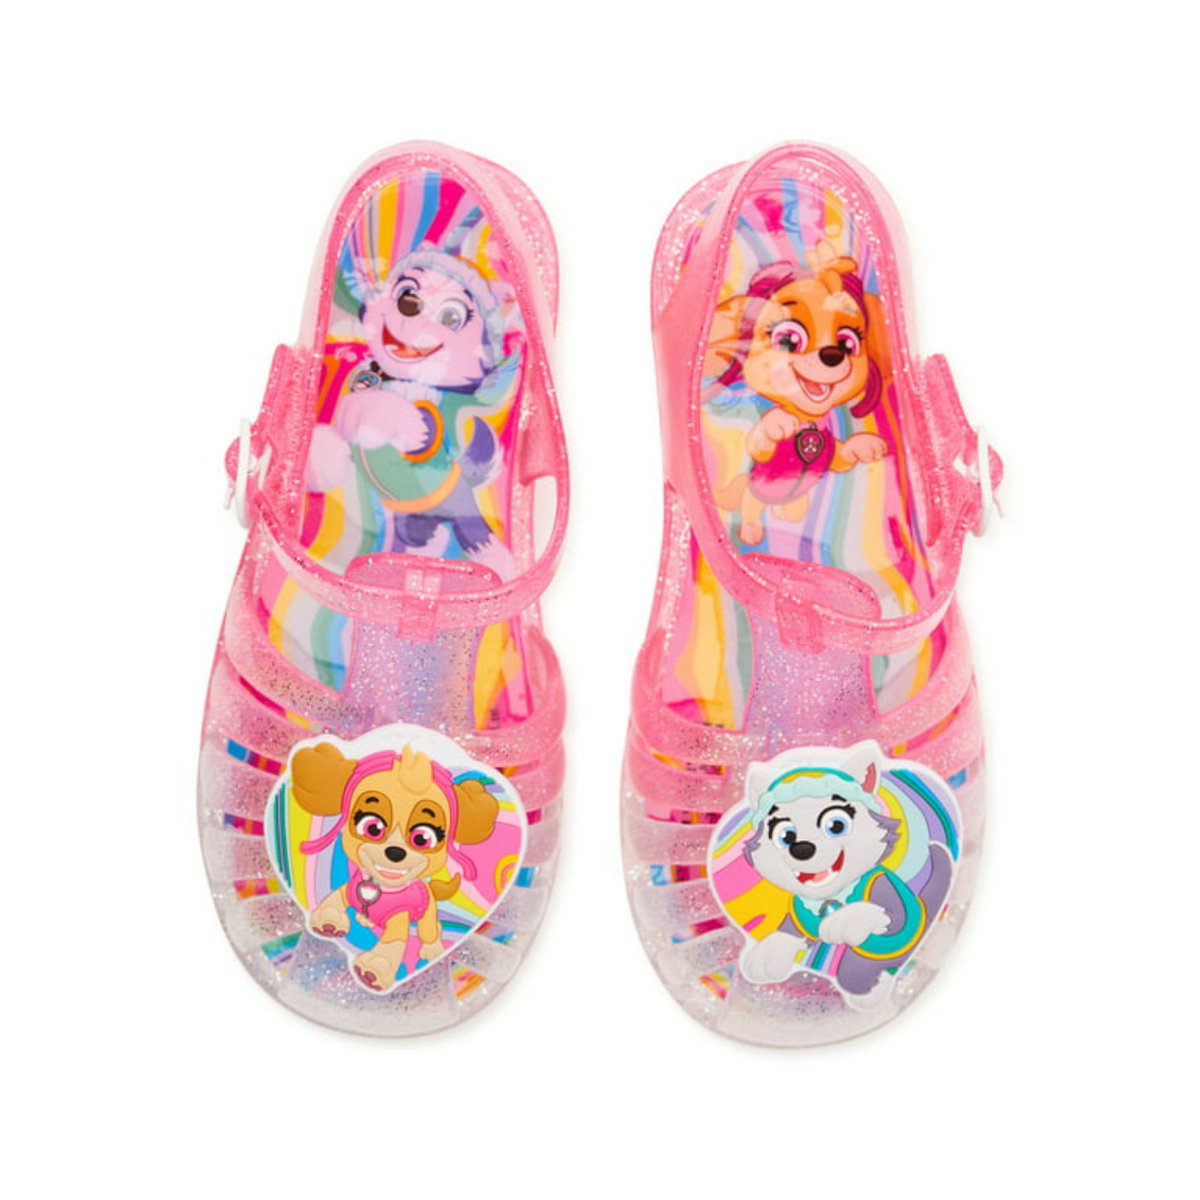 Perfect for a warm spring or #summer day of #play, these adorable jelly #sandals feature her favorite characters from Nickelodeon’s Paw Patrol, Sky and Everest. Was $18.99, Now $9.22 shopstyle.it/l/bZvMj #jellysandles #girlssandles #pawpatrol #sale #ad